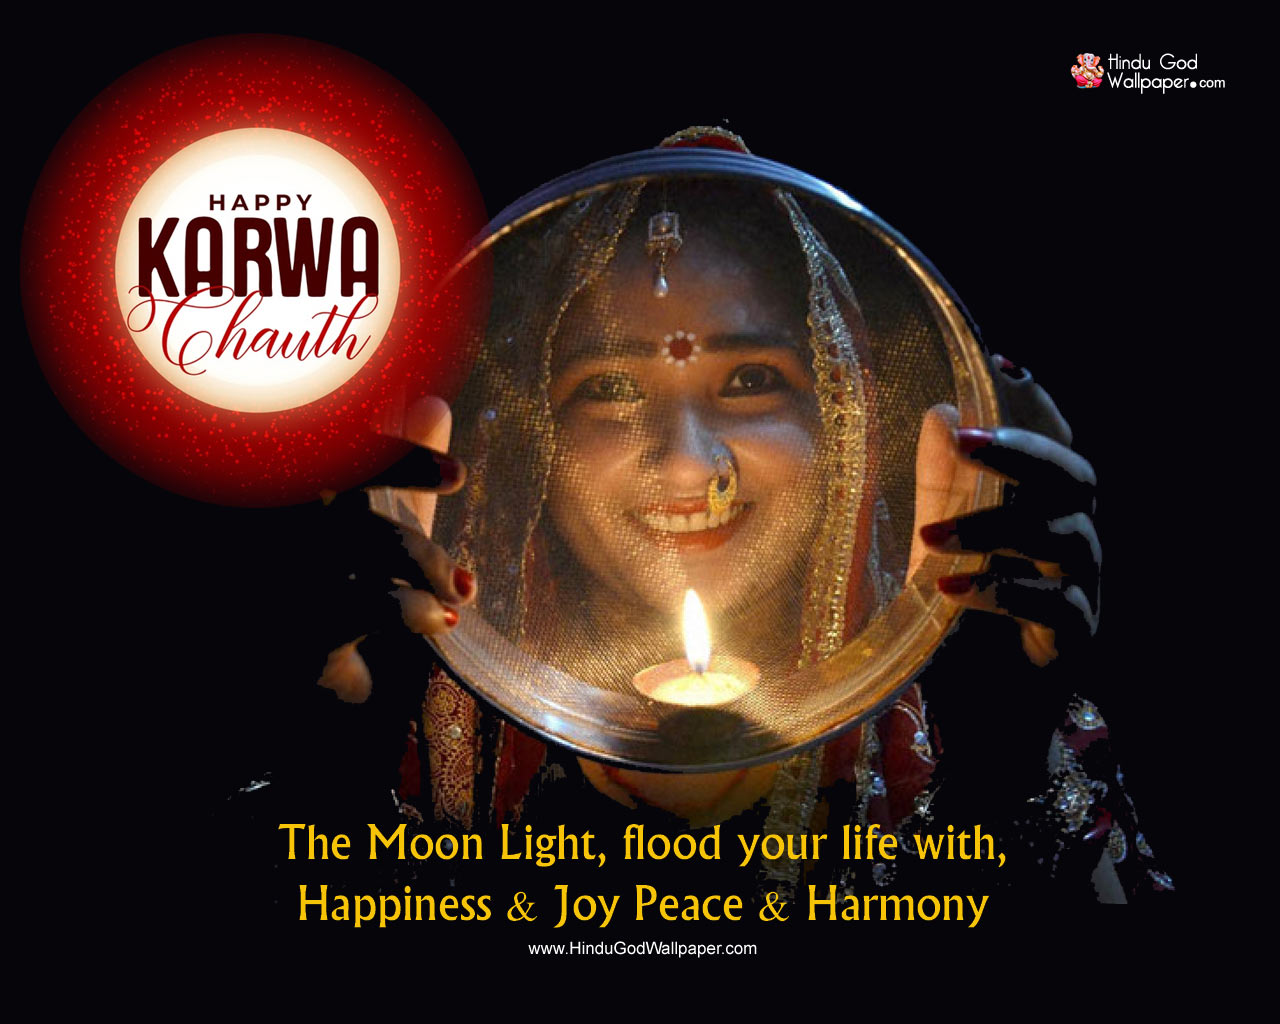 Karwa Chauth 2021 Wallpapers HD Images & Photos Download